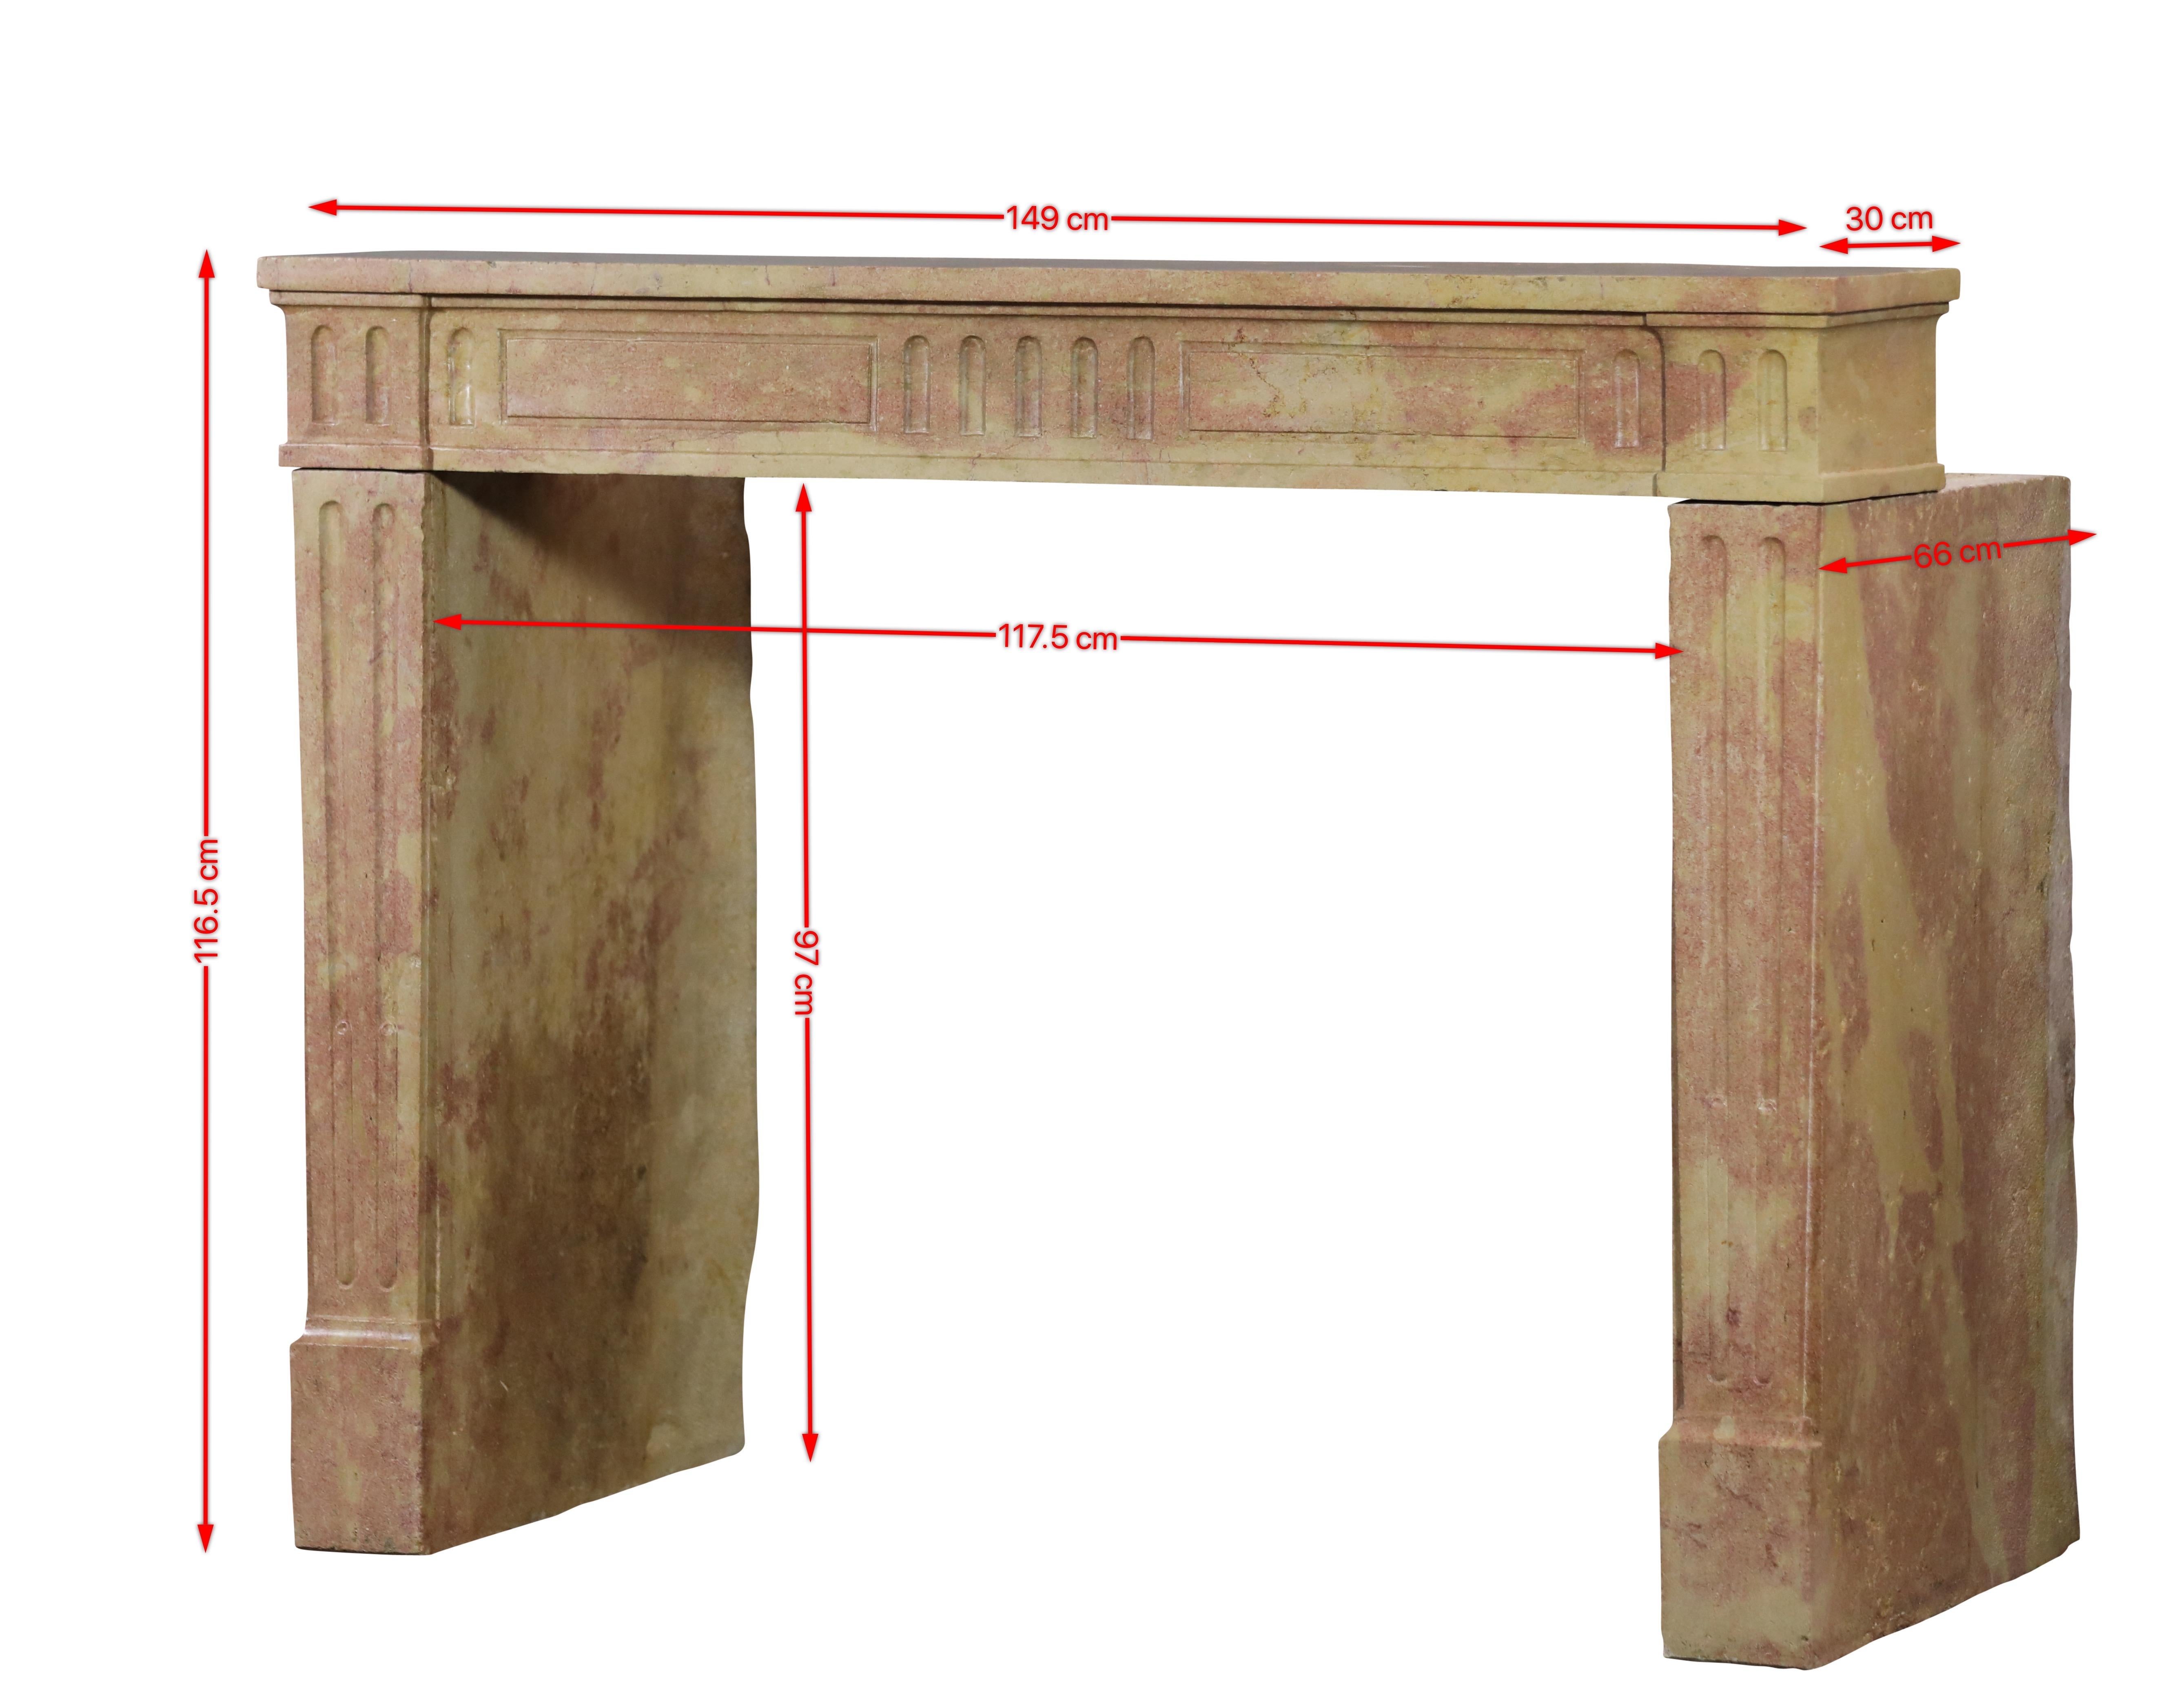 Classic French Louis XVI style fireplace mantle in multi color hard stone from the Dijon Region.
This is a 19th century period timeless decorative element for authentic interior design concept. 
Measures:
149 cm Exterior Width 58,66 Inch
116,5 cm